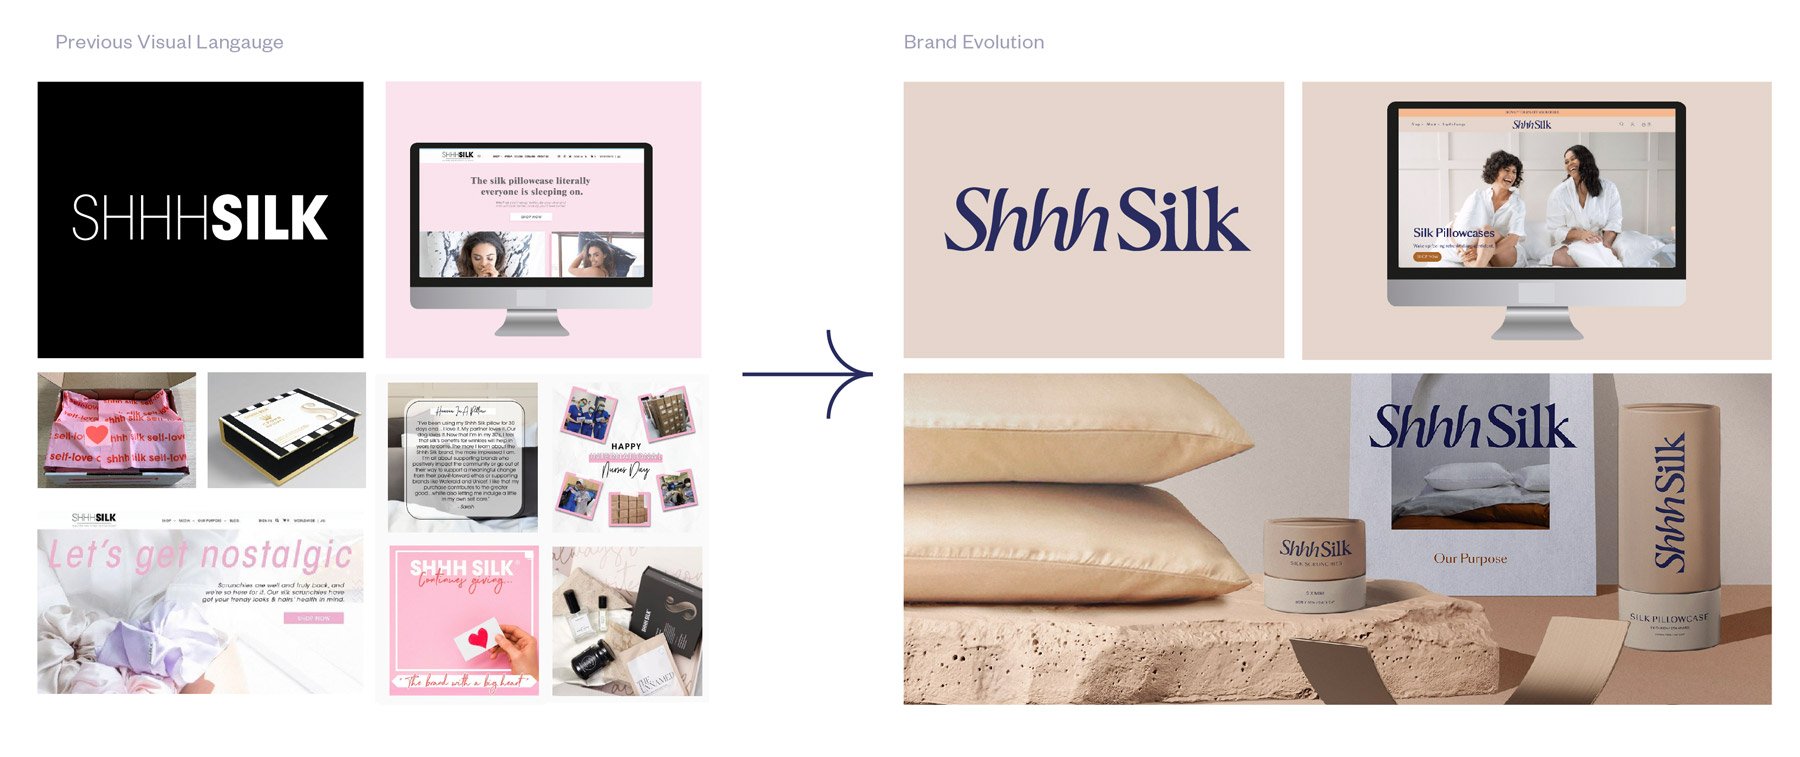 Shhh Silk visual language showing the old and comparing the new brand design